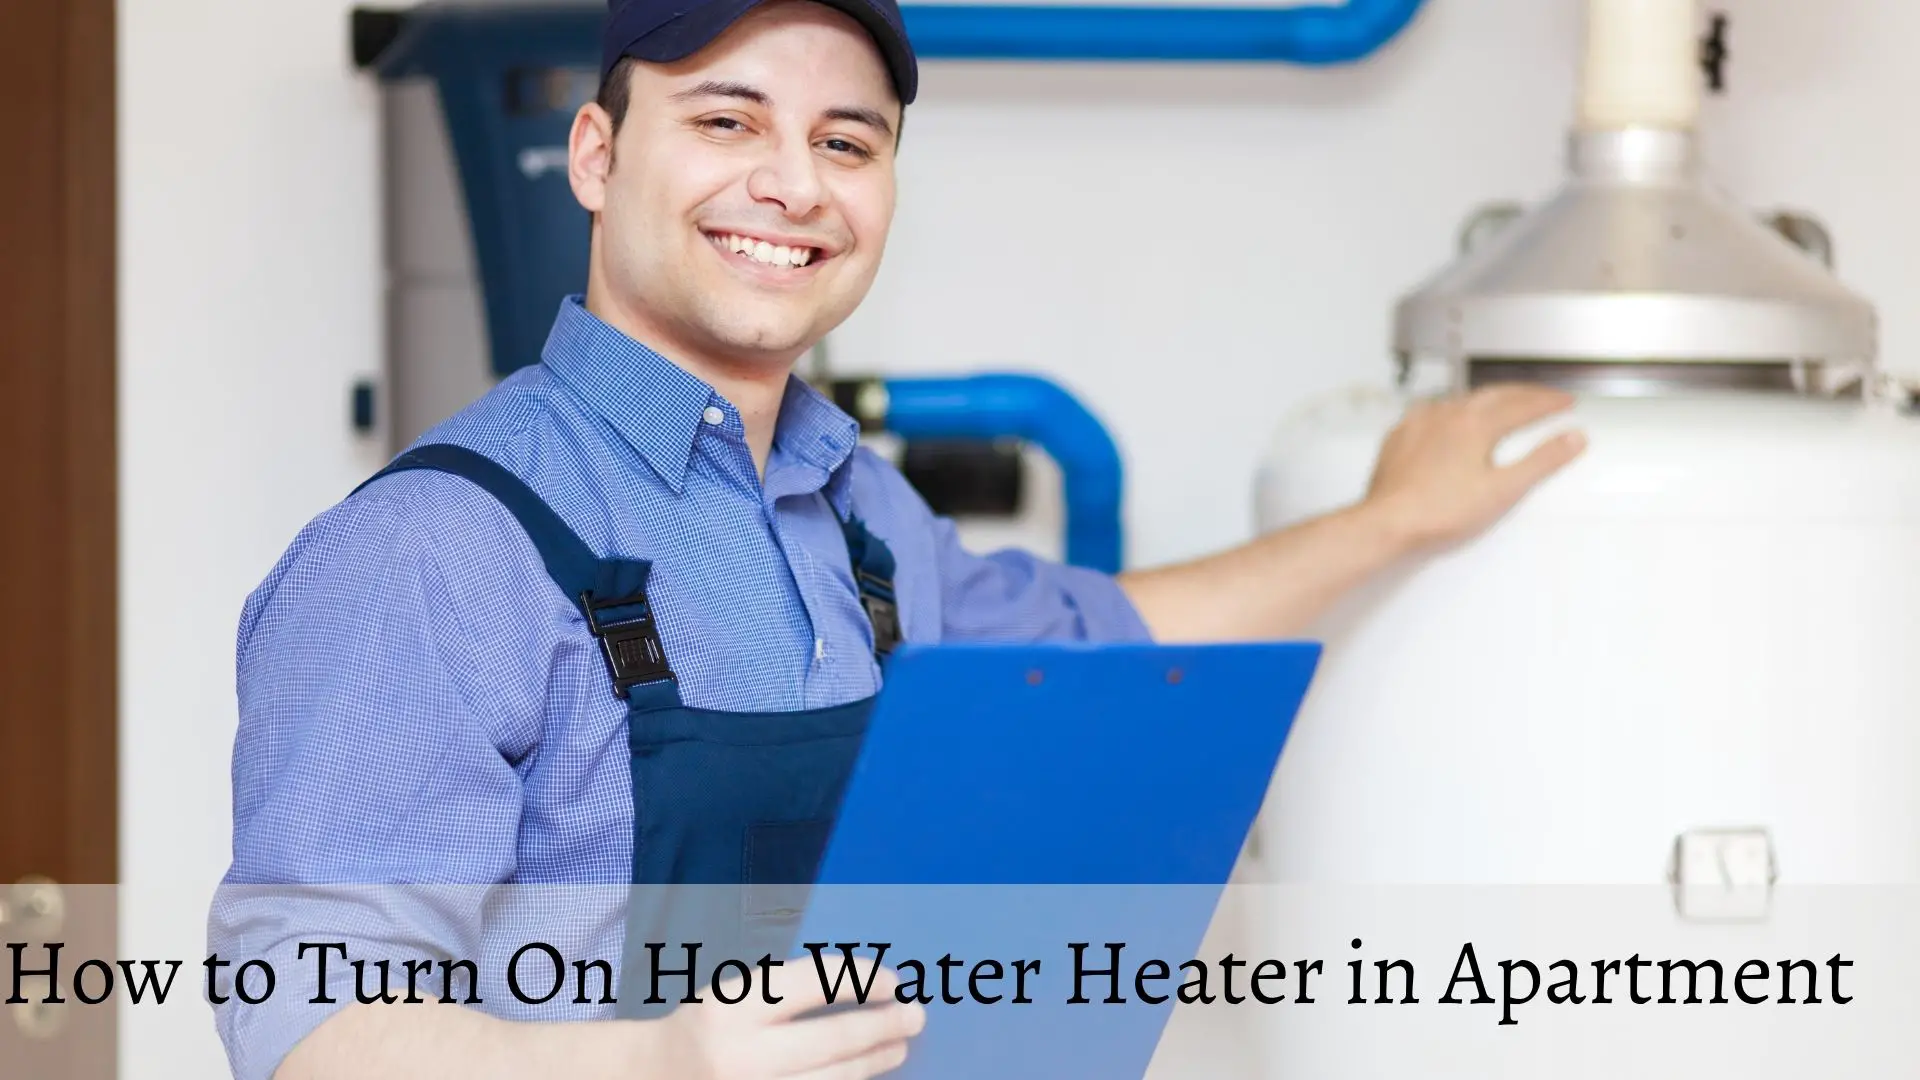 How to Turn On Hot Water Heater in Apartment